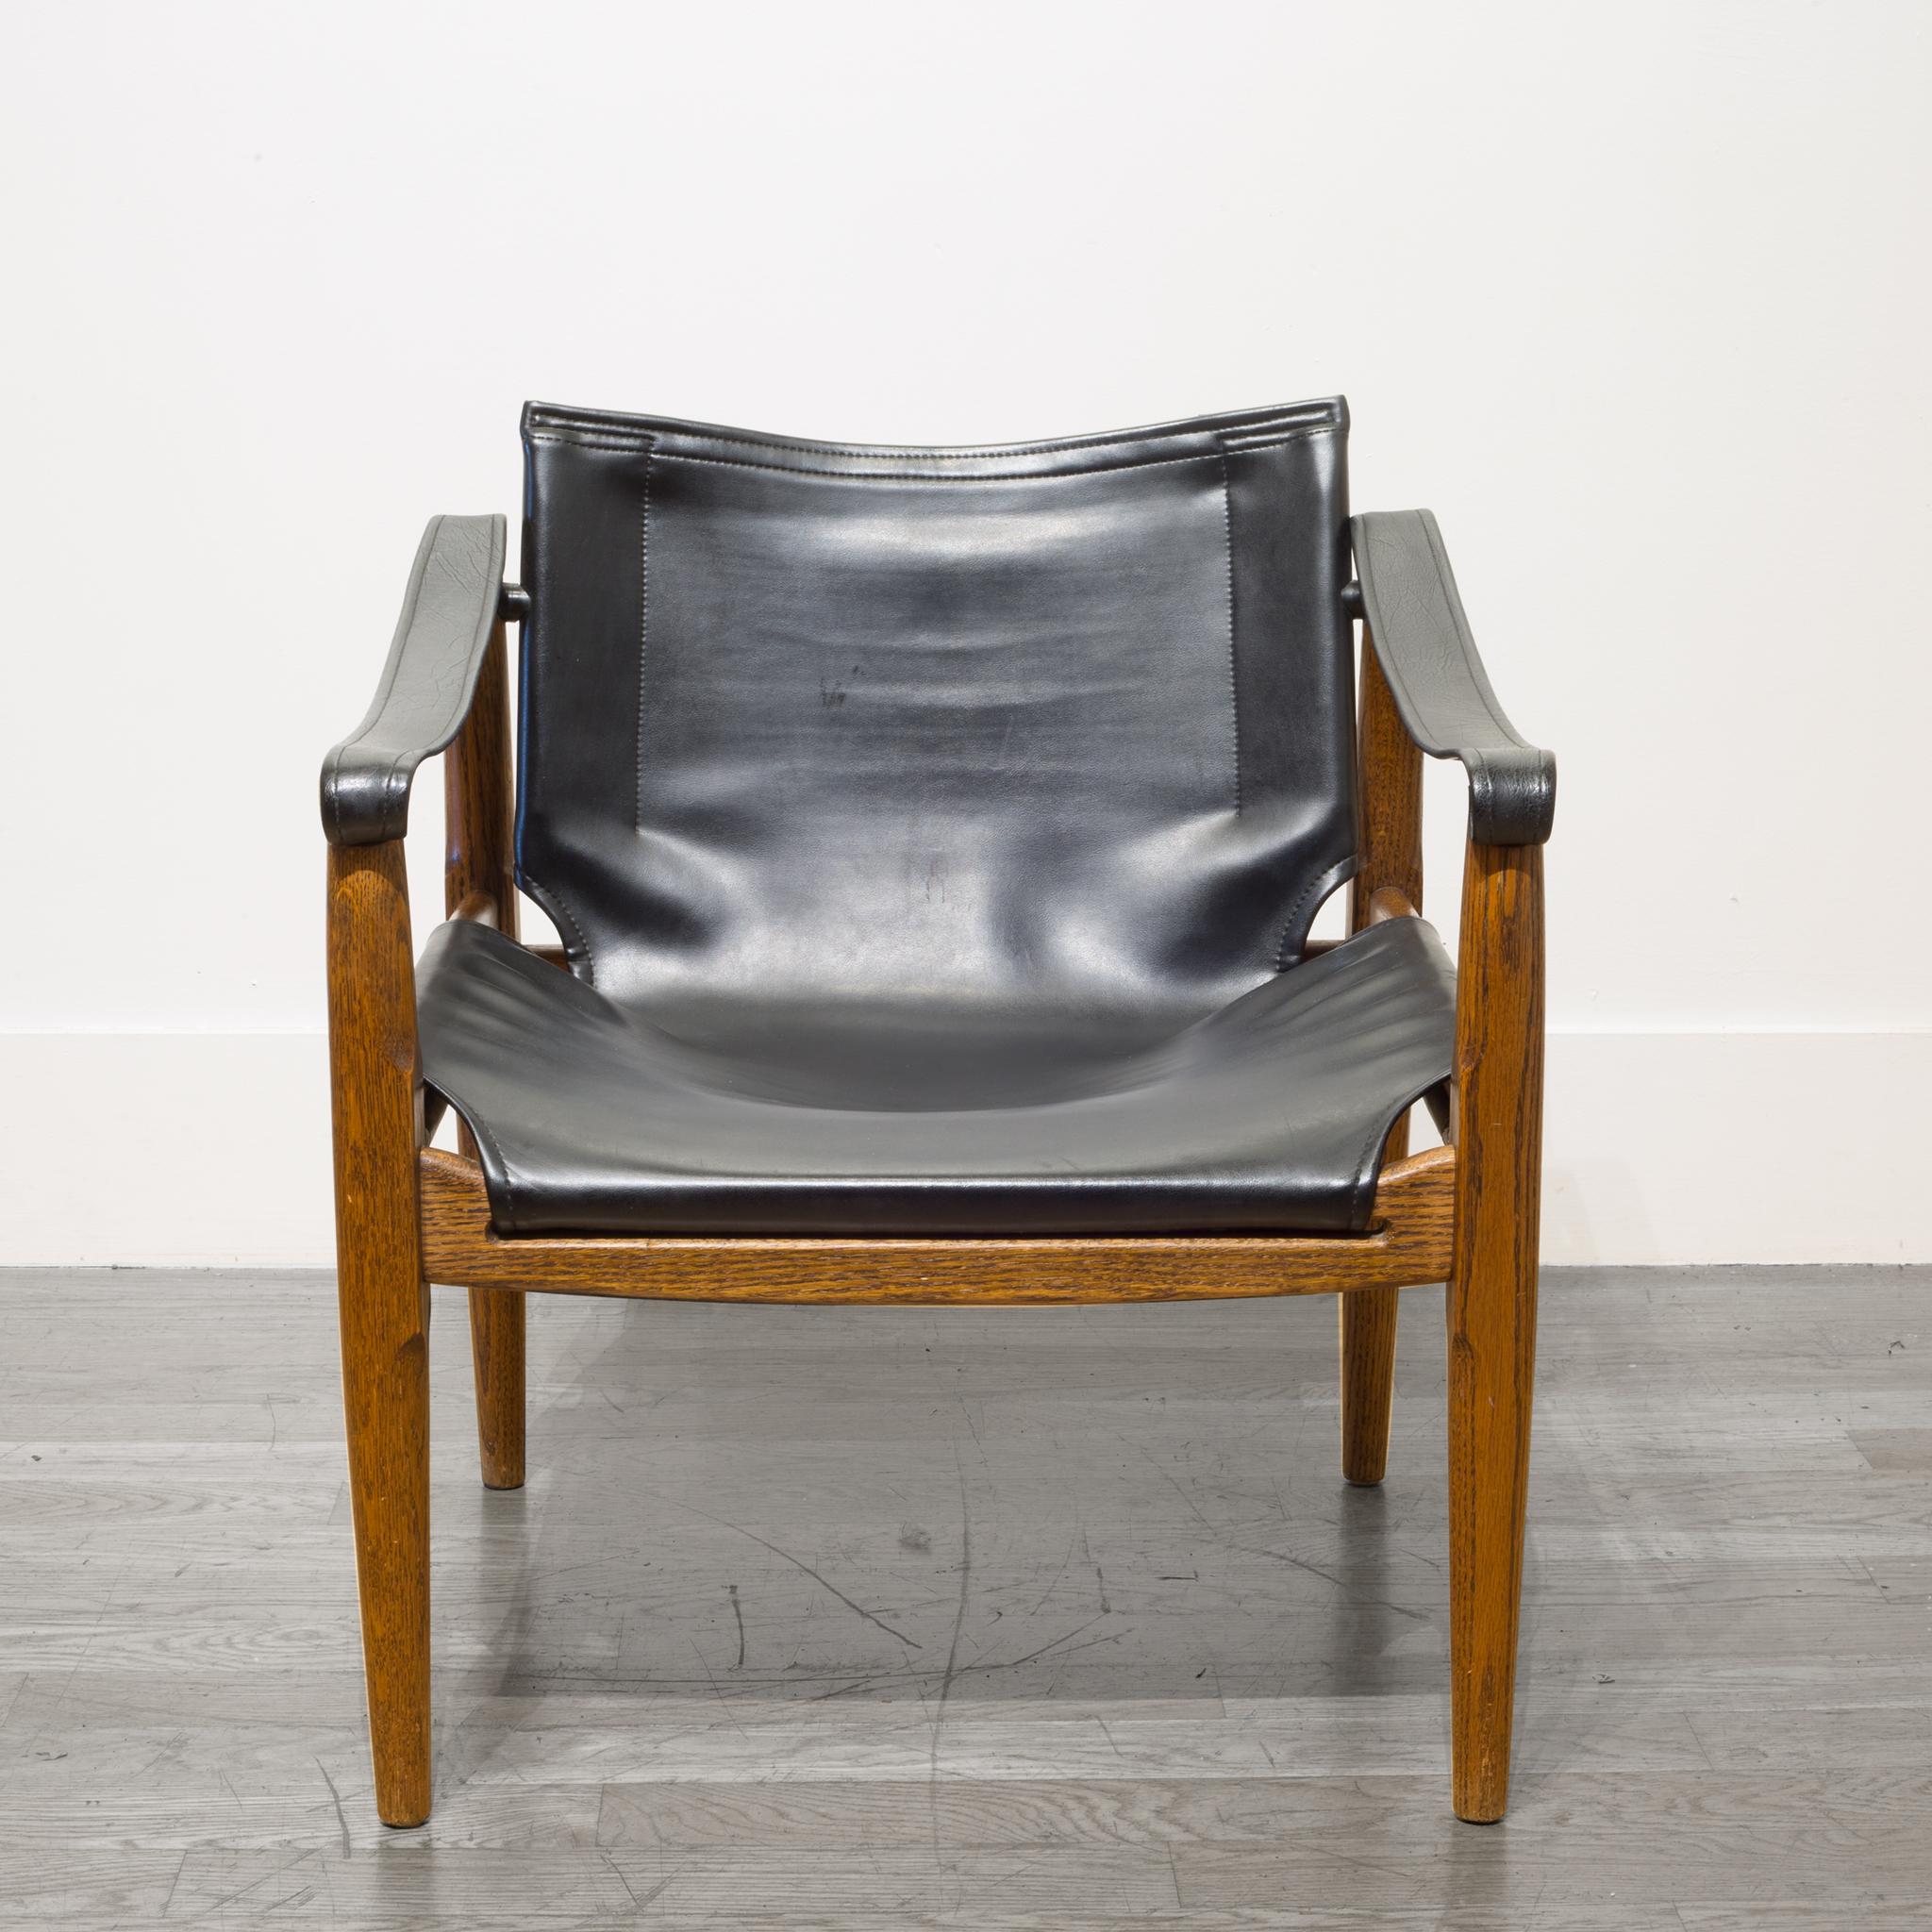 About

This is an original Mid-Century Modern Brown Saltman sling chair designed by Douglass Heaslett. The base is a solid oak frame with original black PVC seat and arm rests. The chair has organic lines with modern detailing on the sides. This